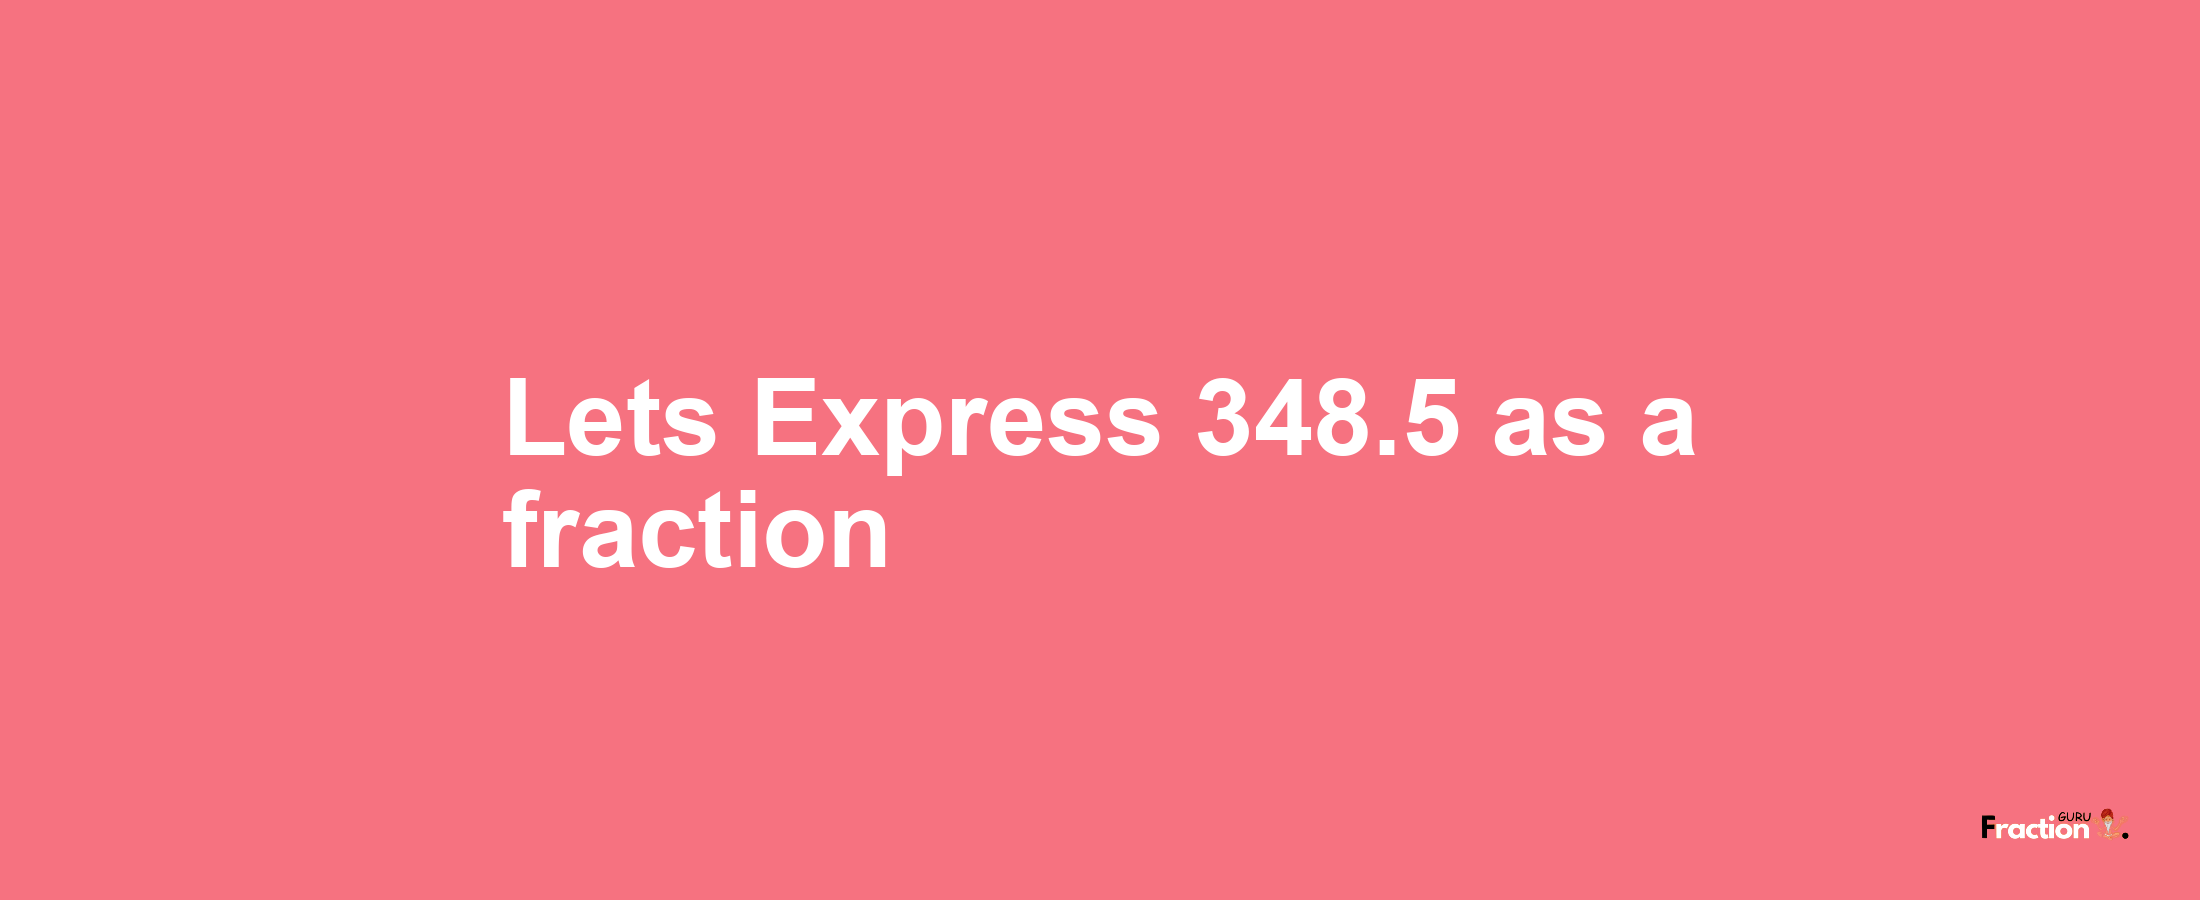 Lets Express 348.5 as afraction